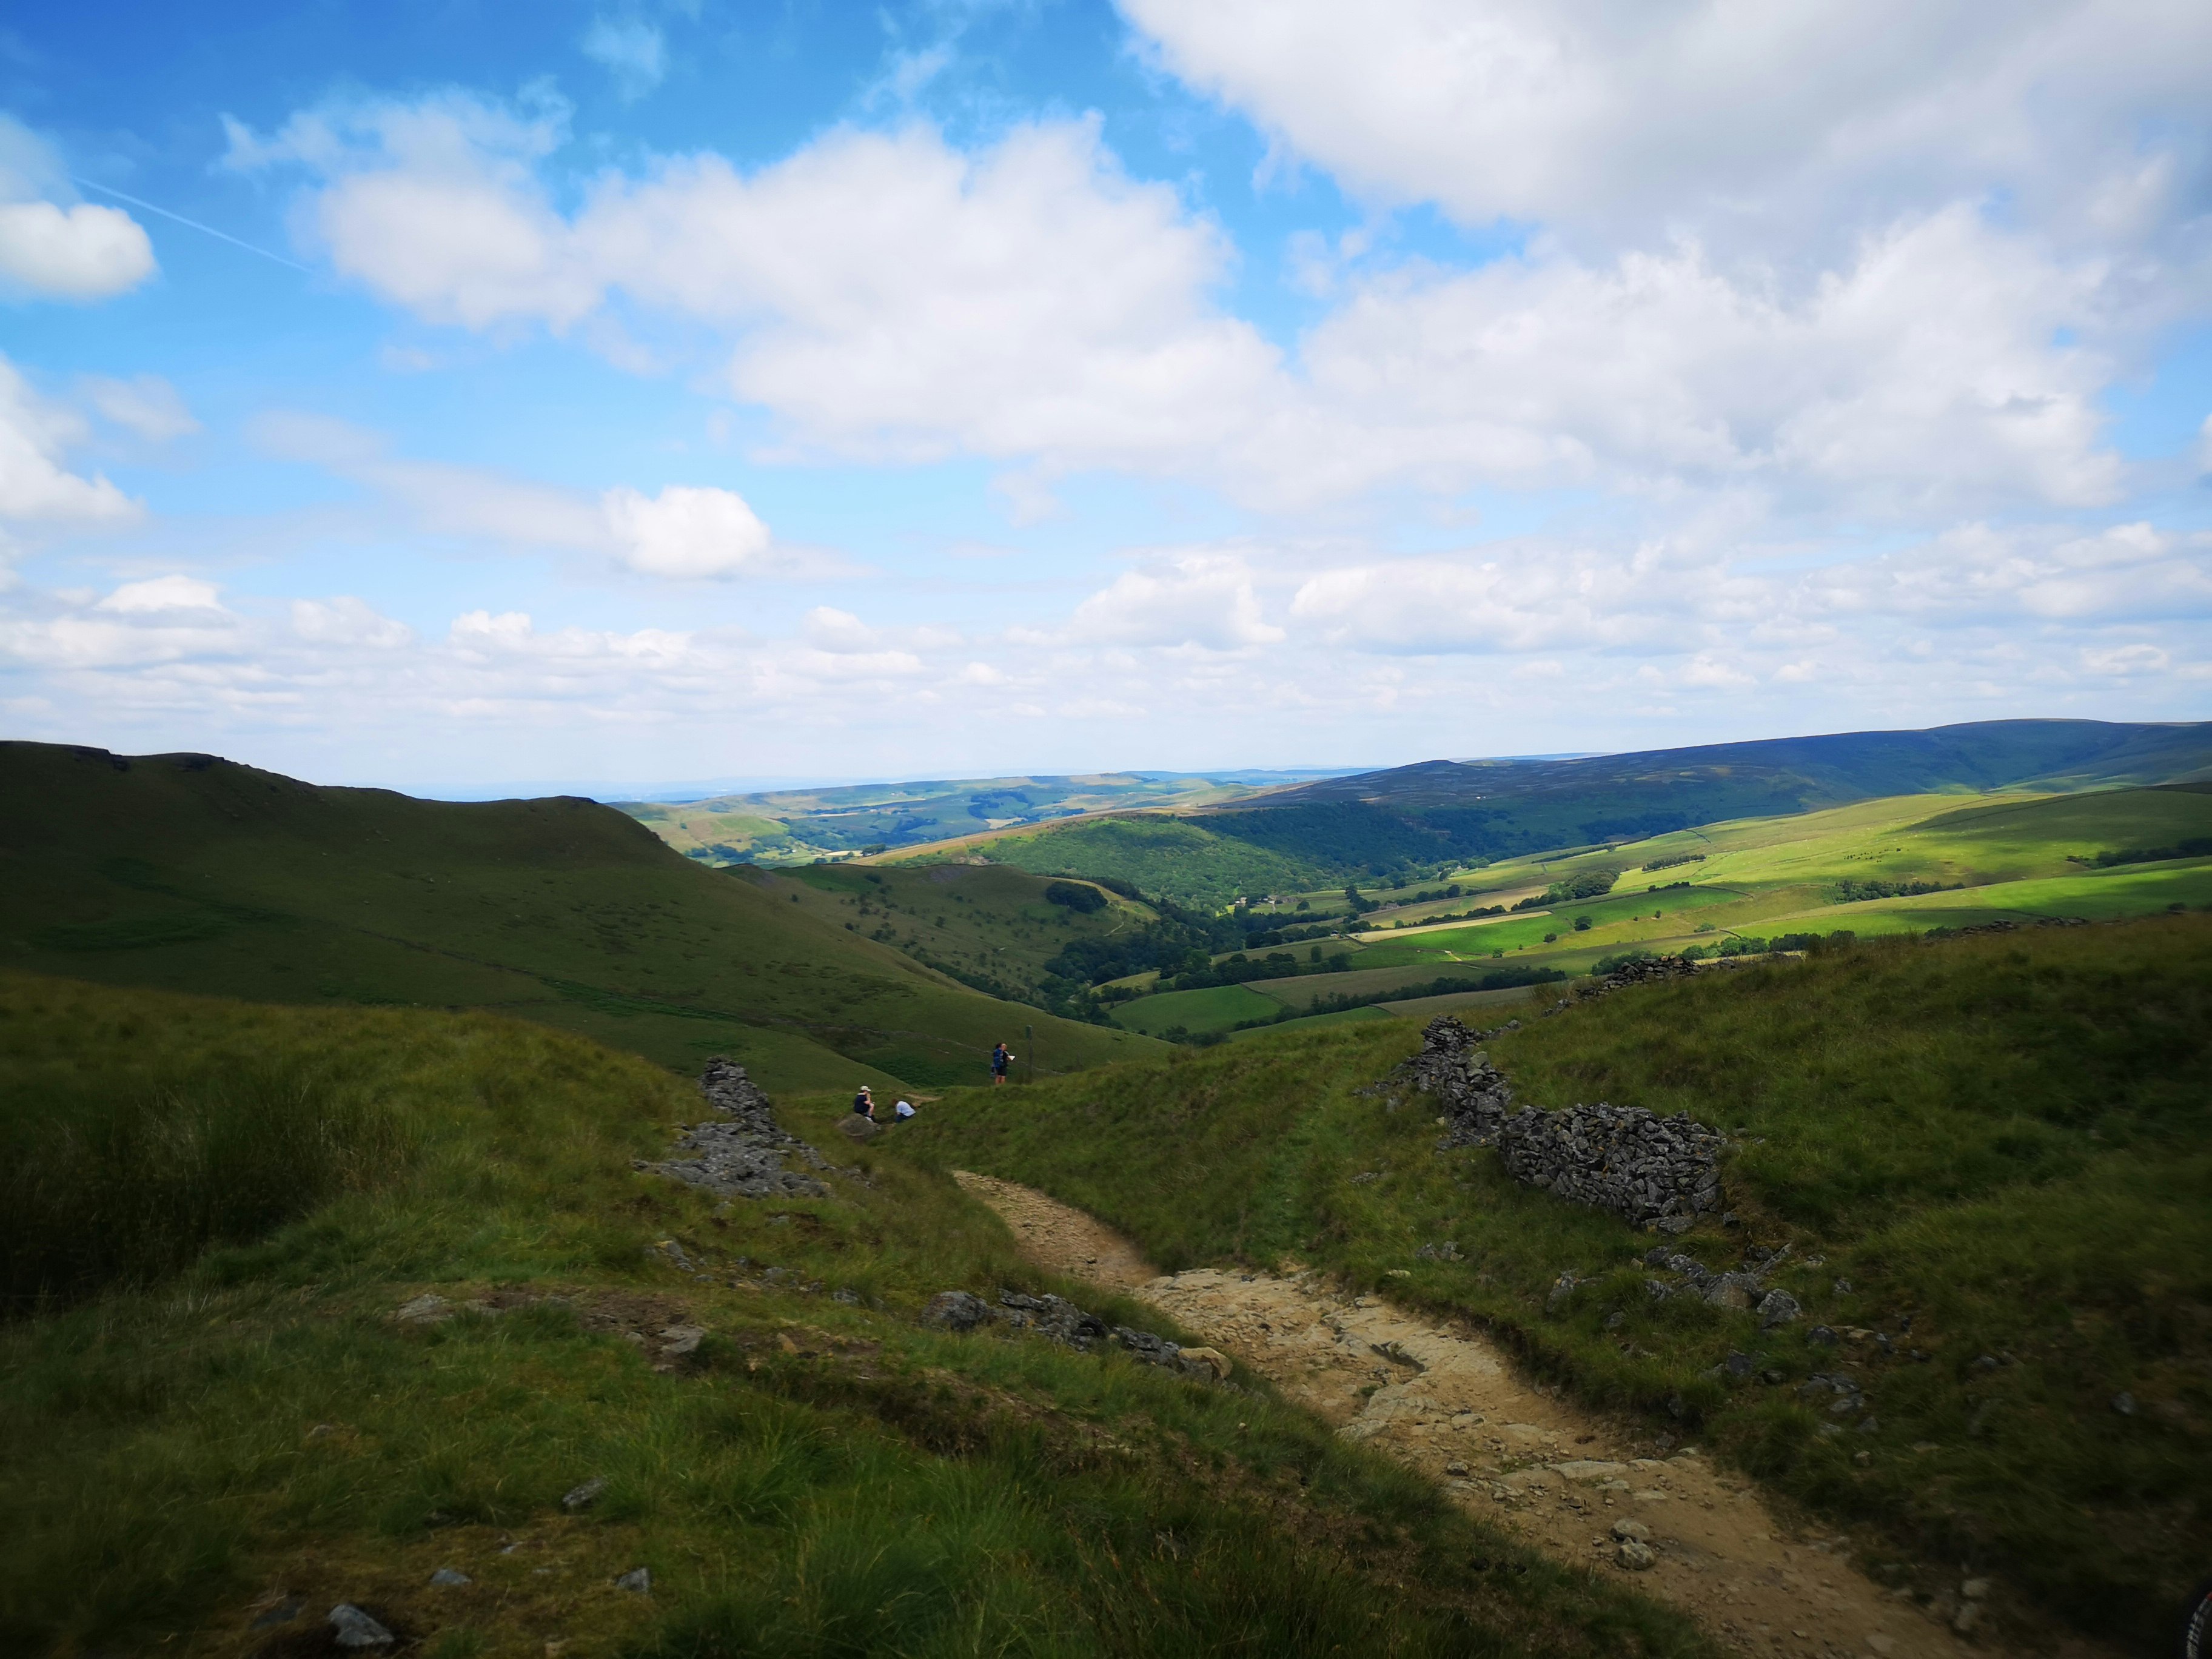 Peak District forests and bike paths